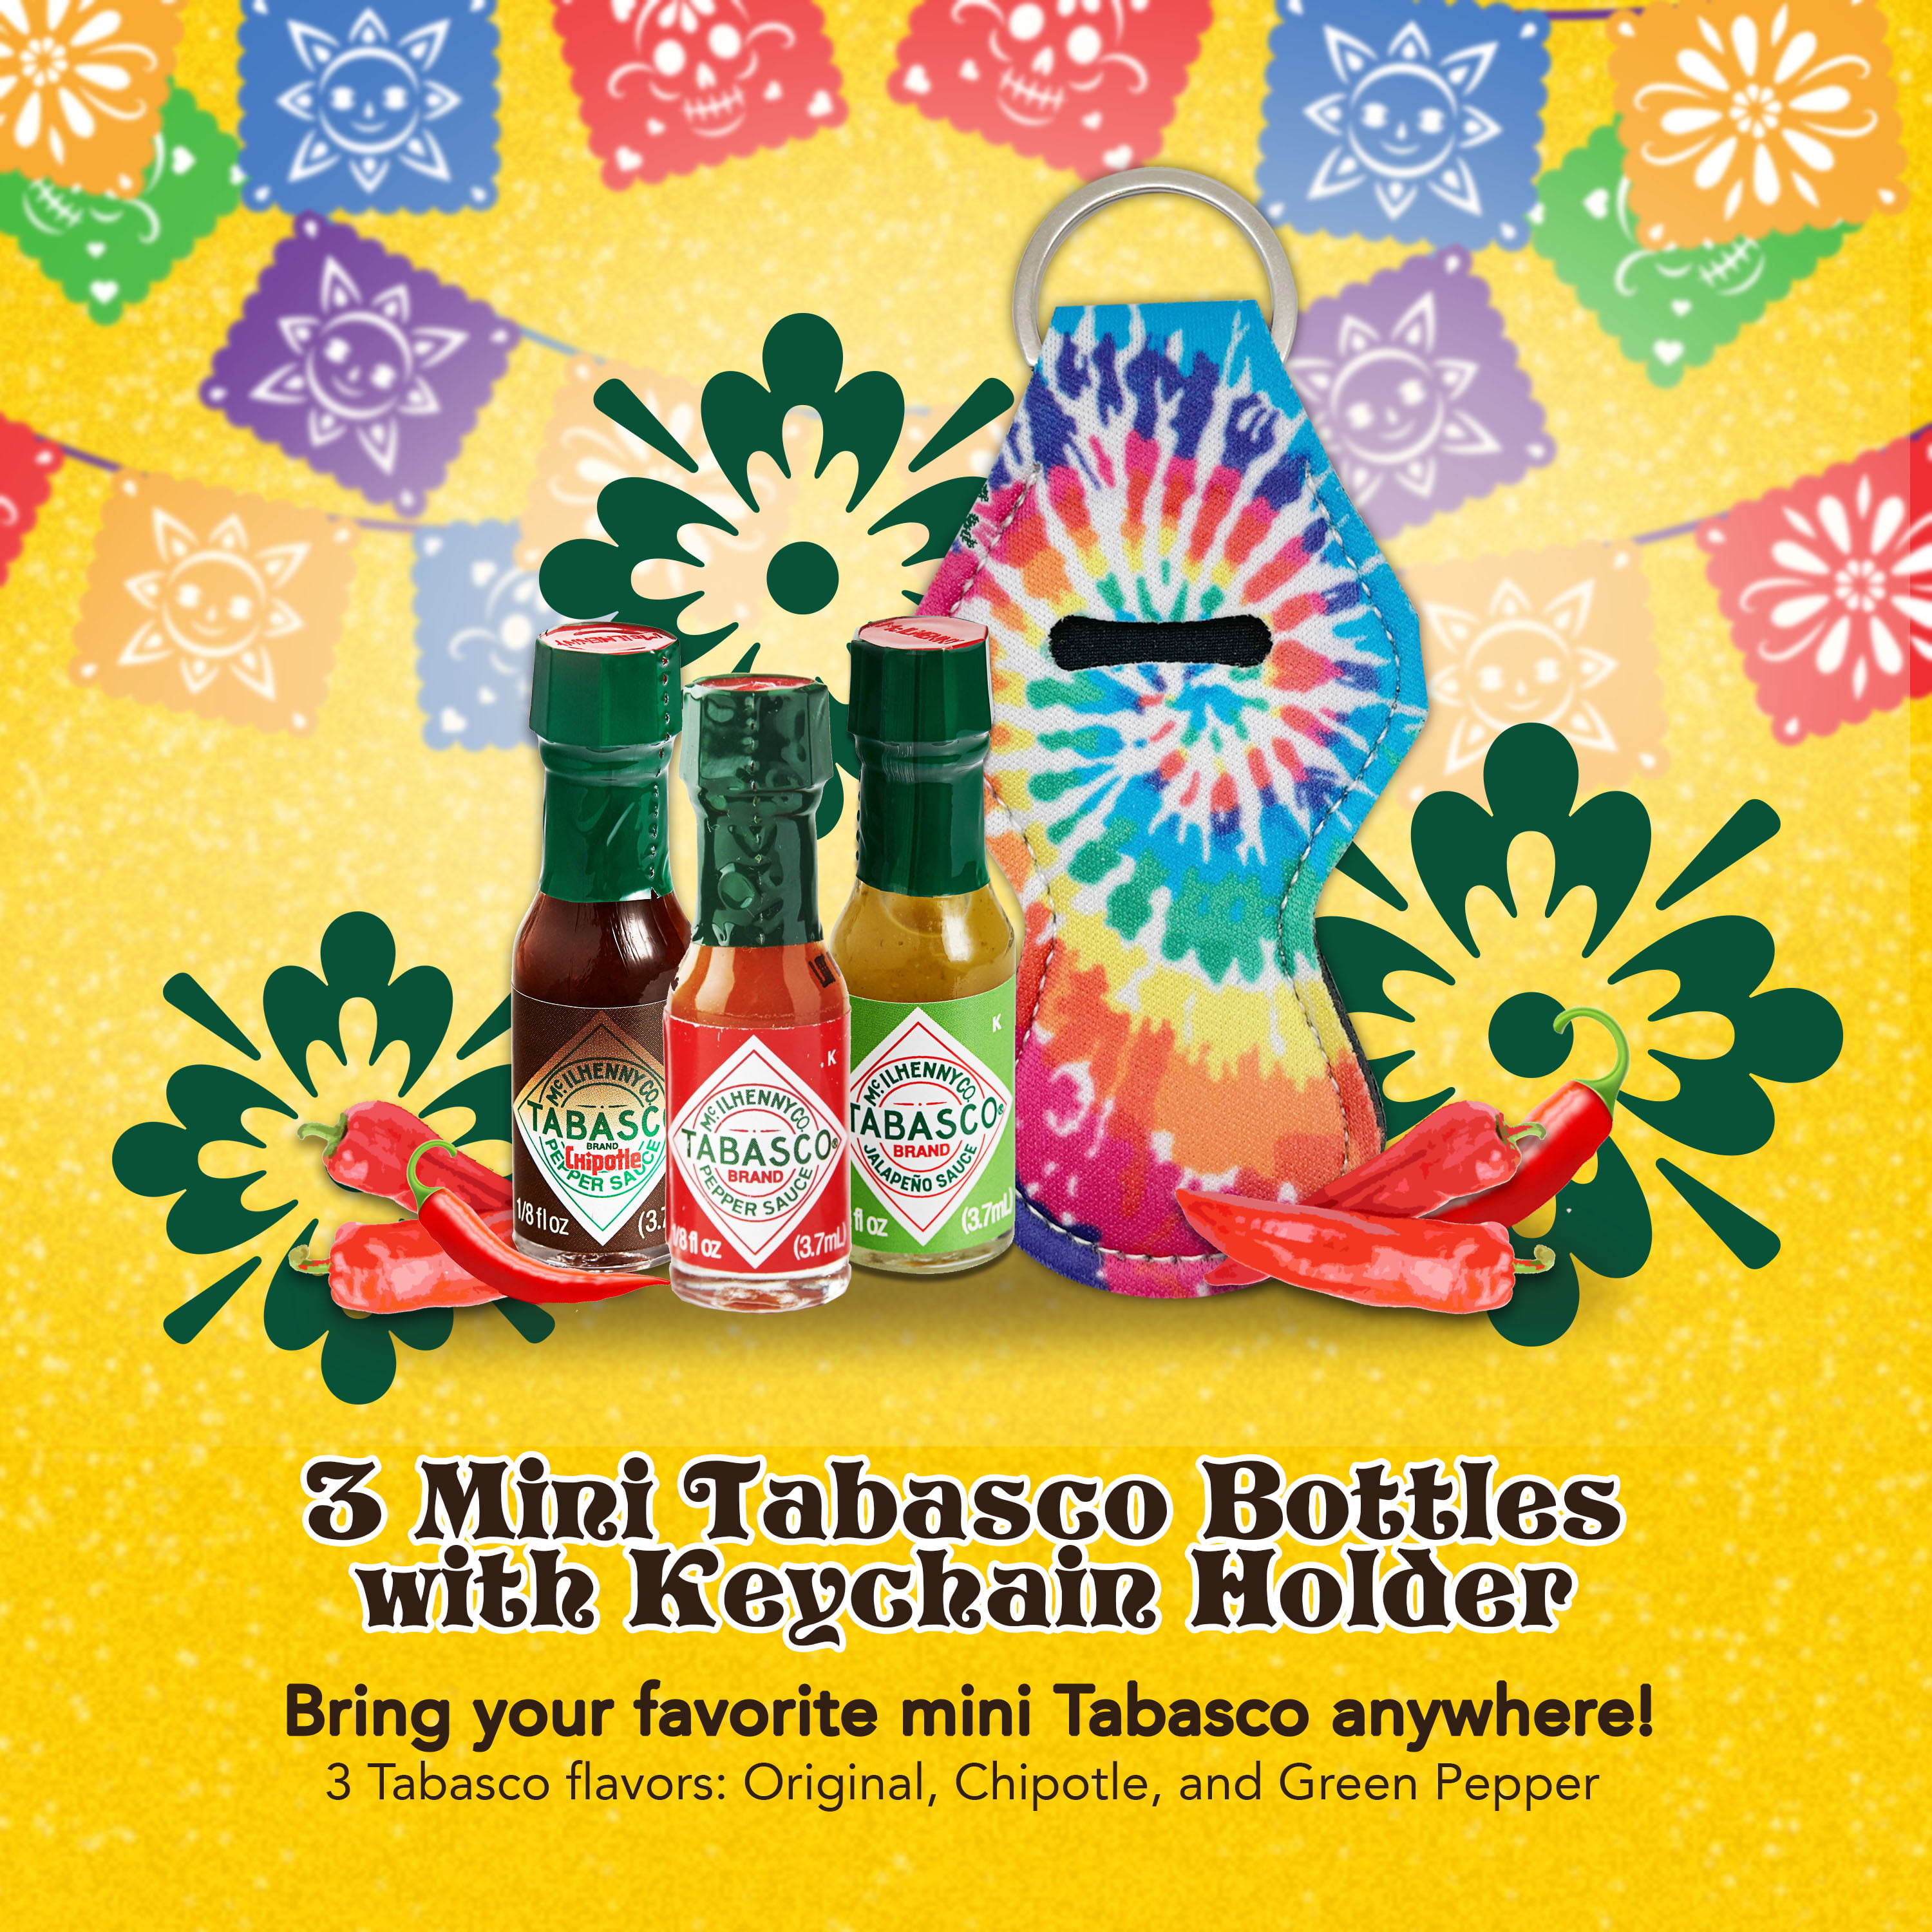 Tabasco Sauce Keychain Keyring Key Ring with FREE Mini 1/8 Oz Bottle of  Original Hot Sauce Perfect for Pocket, Purse, or Travel - Miami Hat Shop